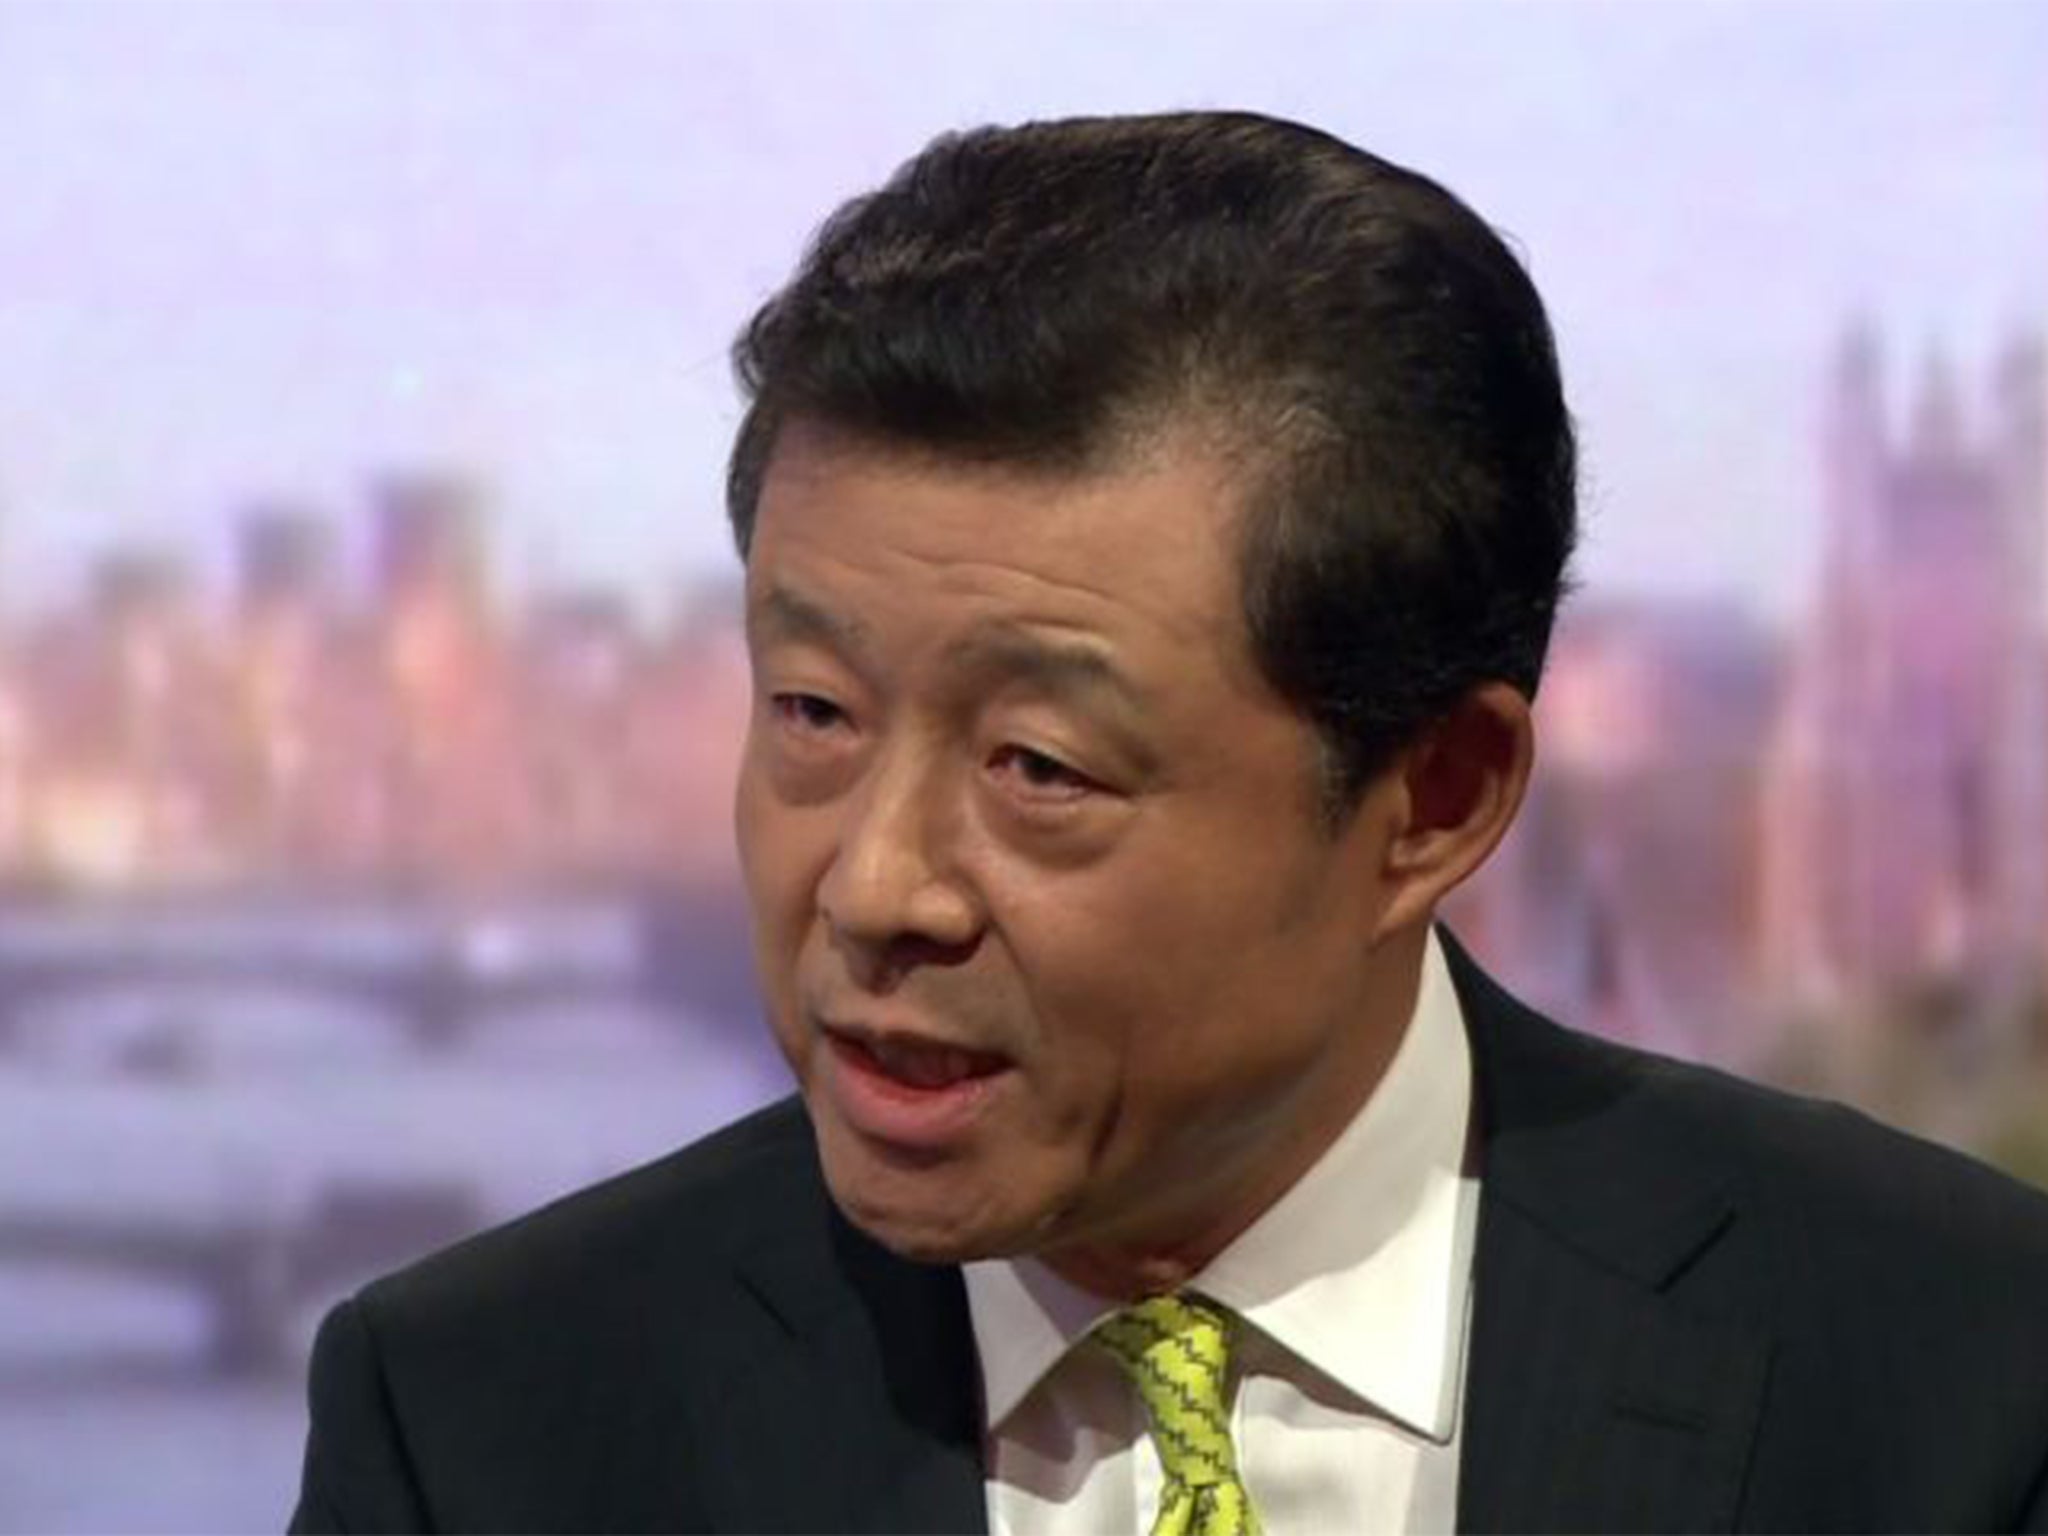 Liu Xiaoming, Chinese ambassador to the UK, speaking to 'The Andrew Marr Show'